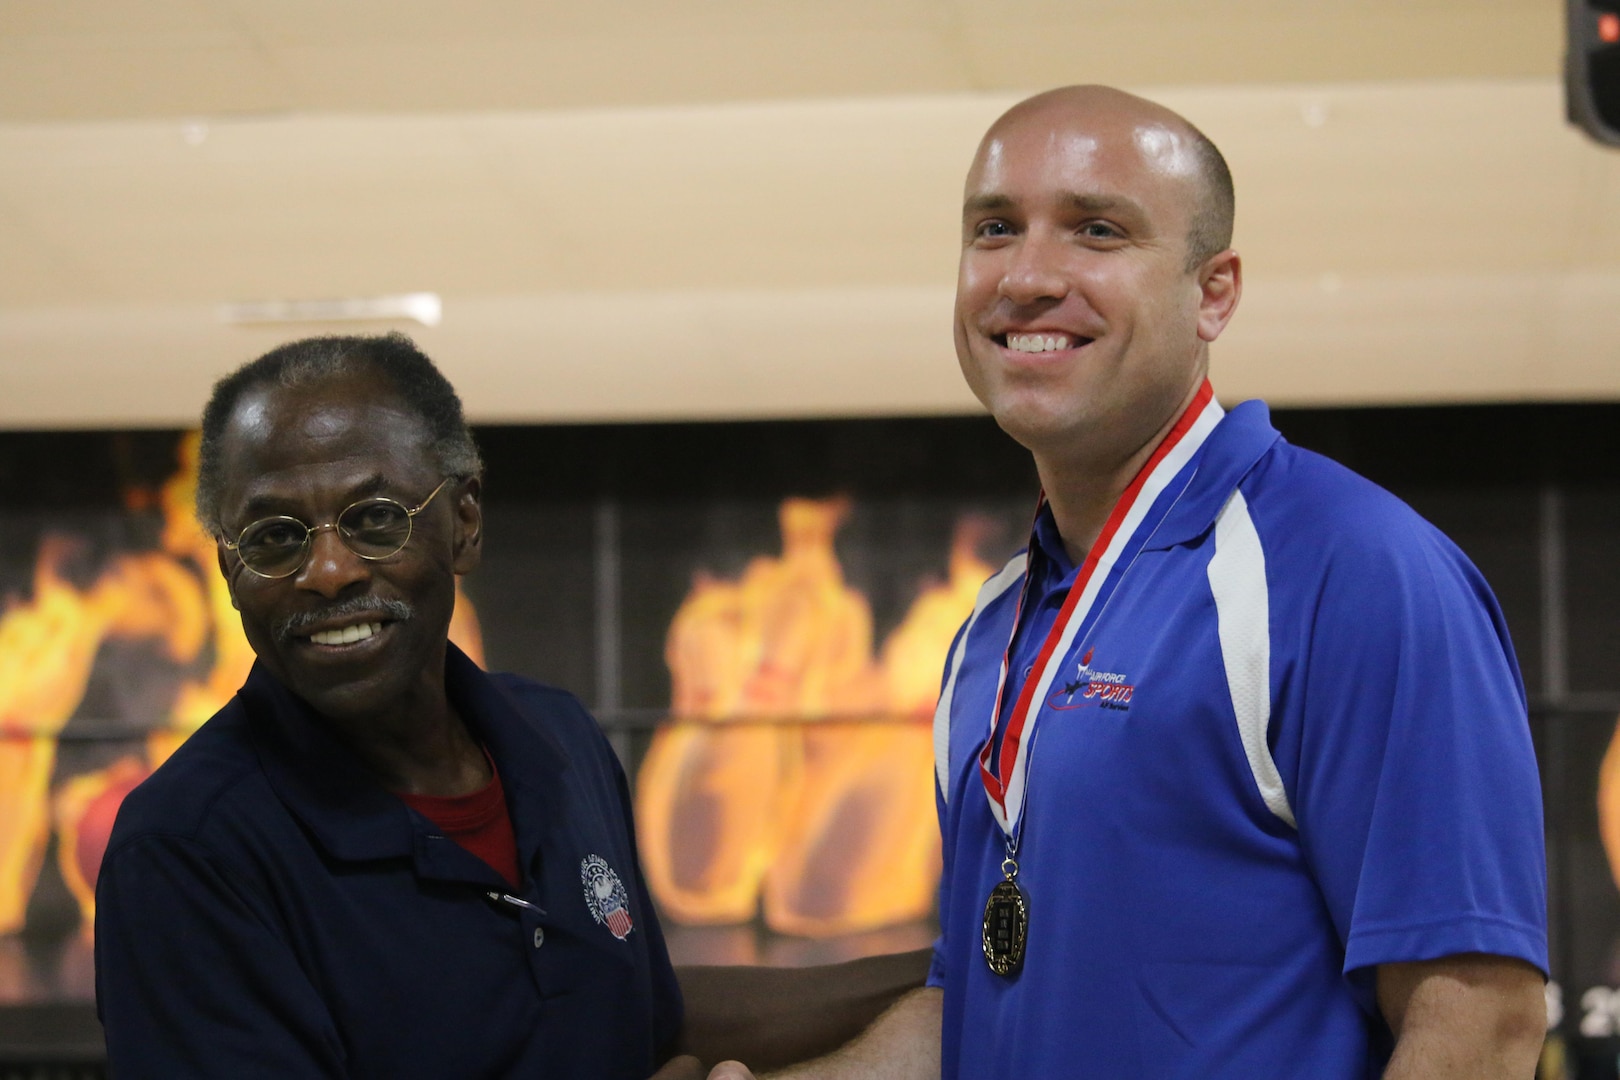 Armed Forces Sports Deputy Secretariat Mr. Ken Polk congratulates Air Force Staff Sgt. James McTaggart of Nellis AFB, Nevada for winning the Men's Title at the Armed Forces Bowling Championship hosted at Marine Corps Base Camp Pendleton, California from 5-8 May at the Leatherneck Lanes.